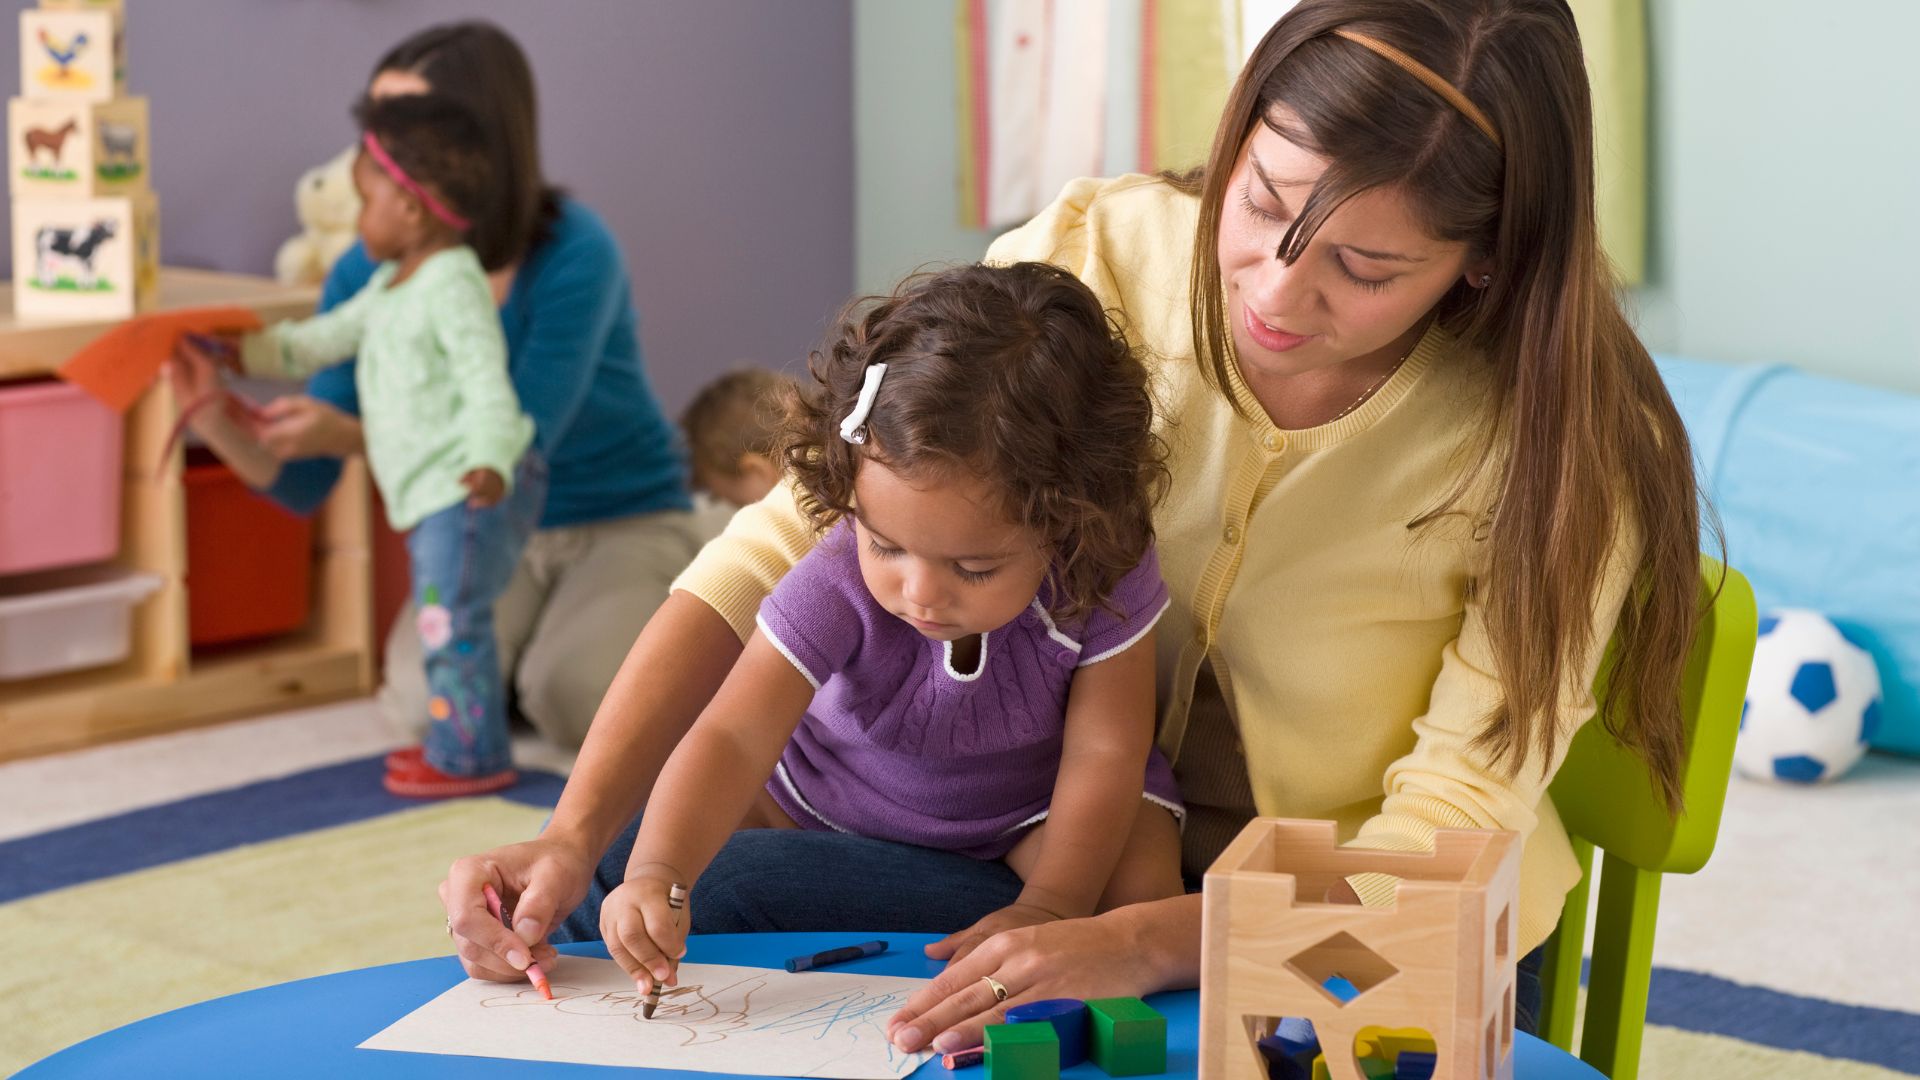 An image of a female teacher and young child who are drawing together at the desk in a classroom. Another female teacher and two young children are seen in the background.